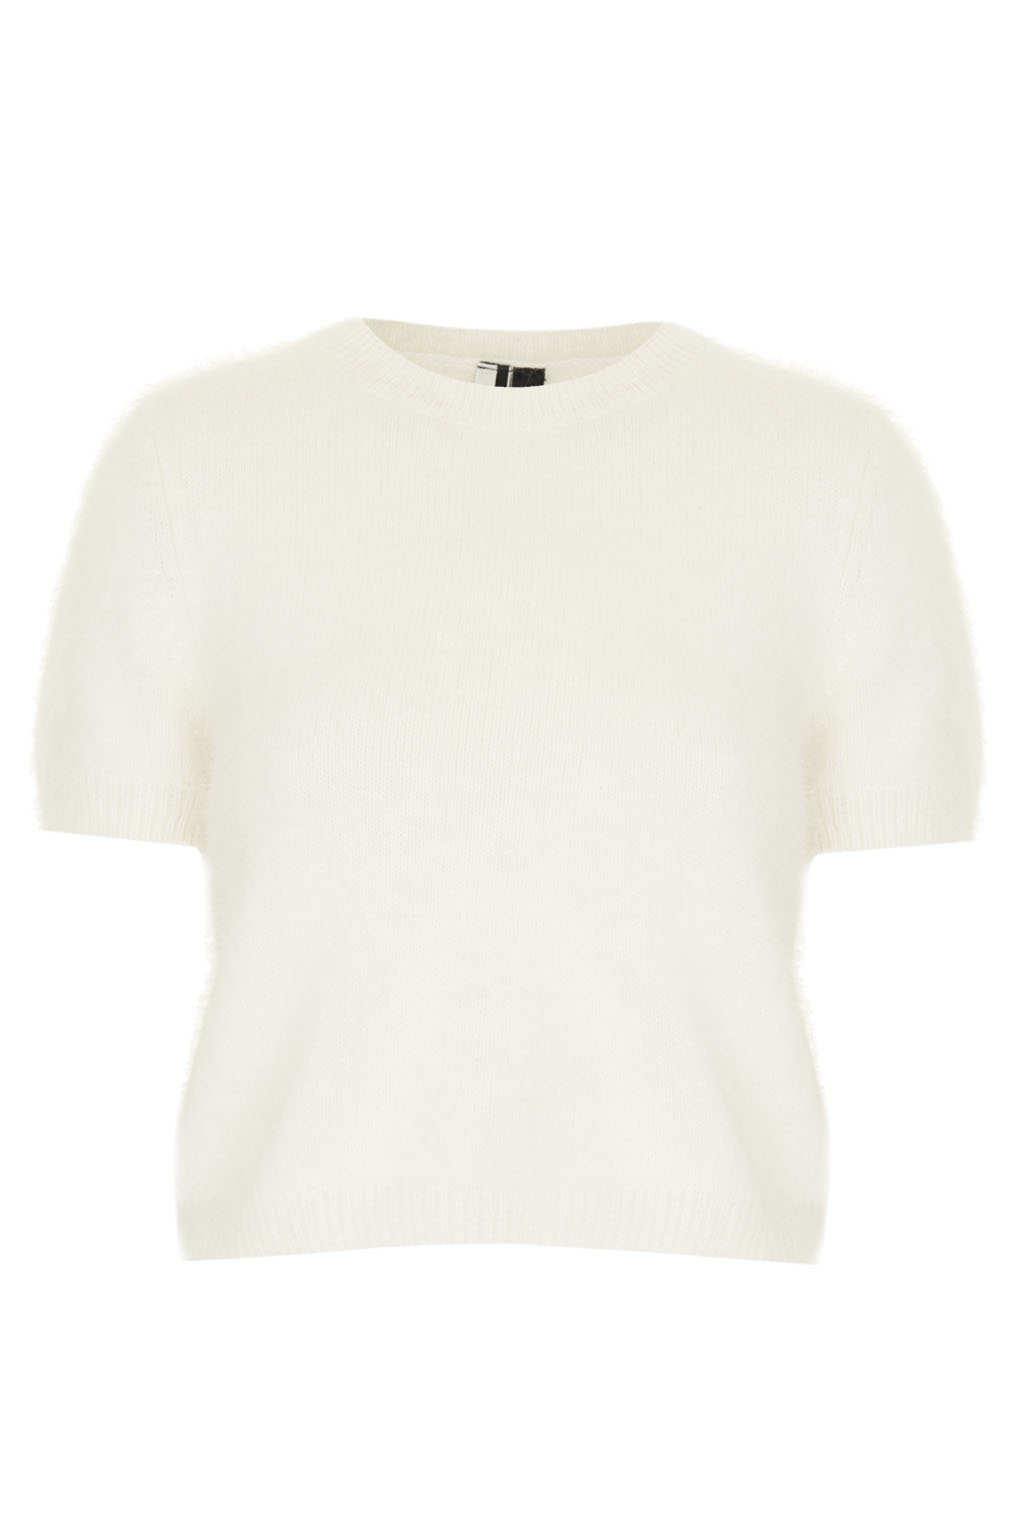 Topshop Knitted Fluffy Angora Jumper in Natural | Lyst